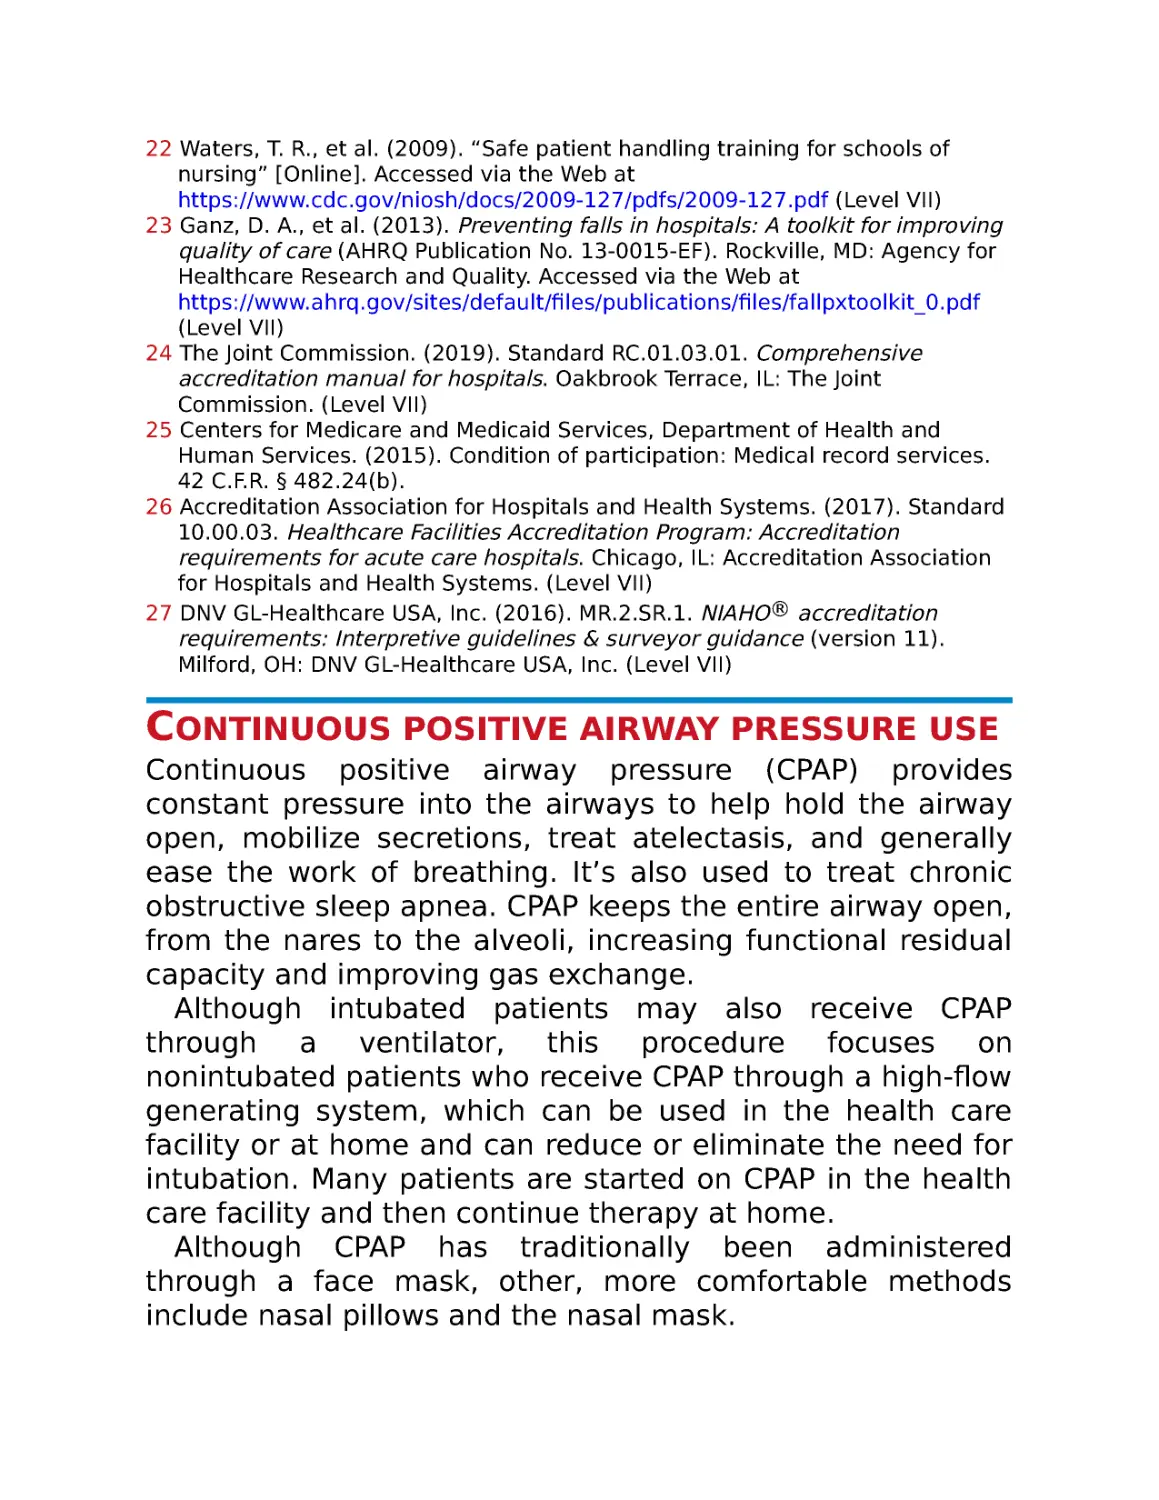 Continuous positive airway pressure use